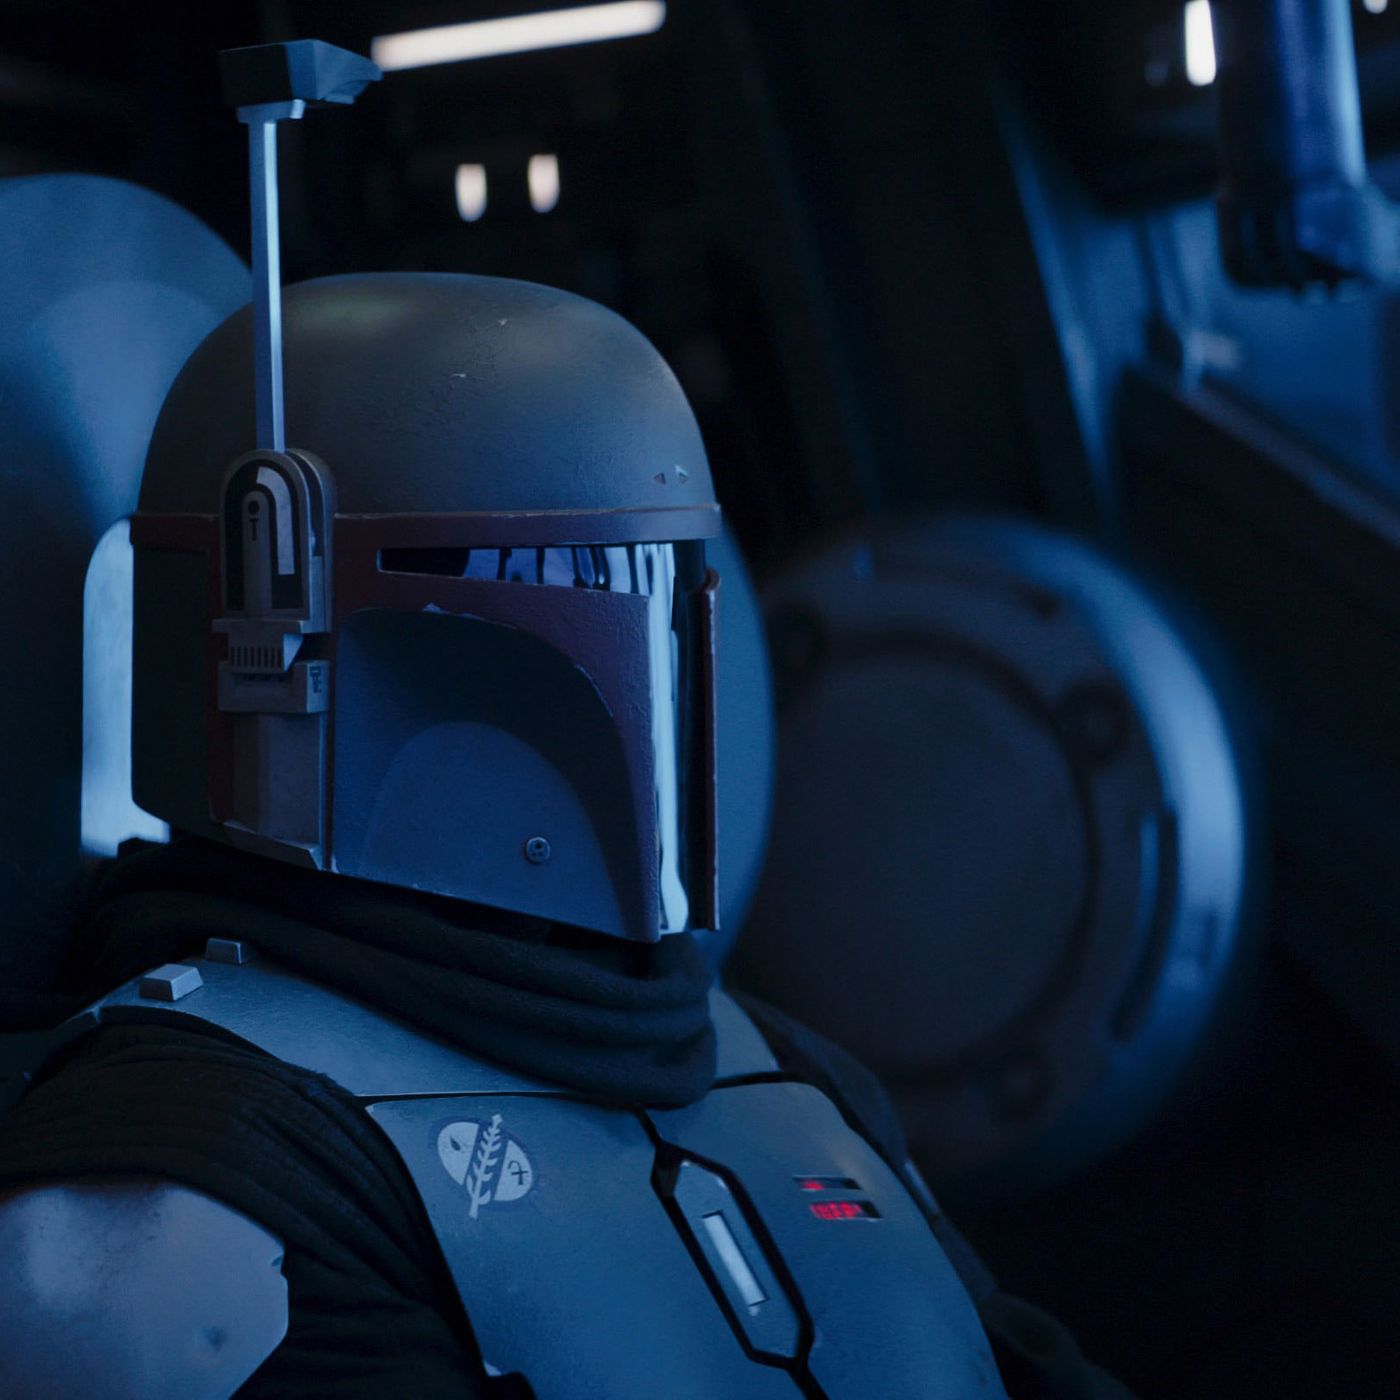 The Mandalorian Season 3 Is Approaching, So Celebrate With This